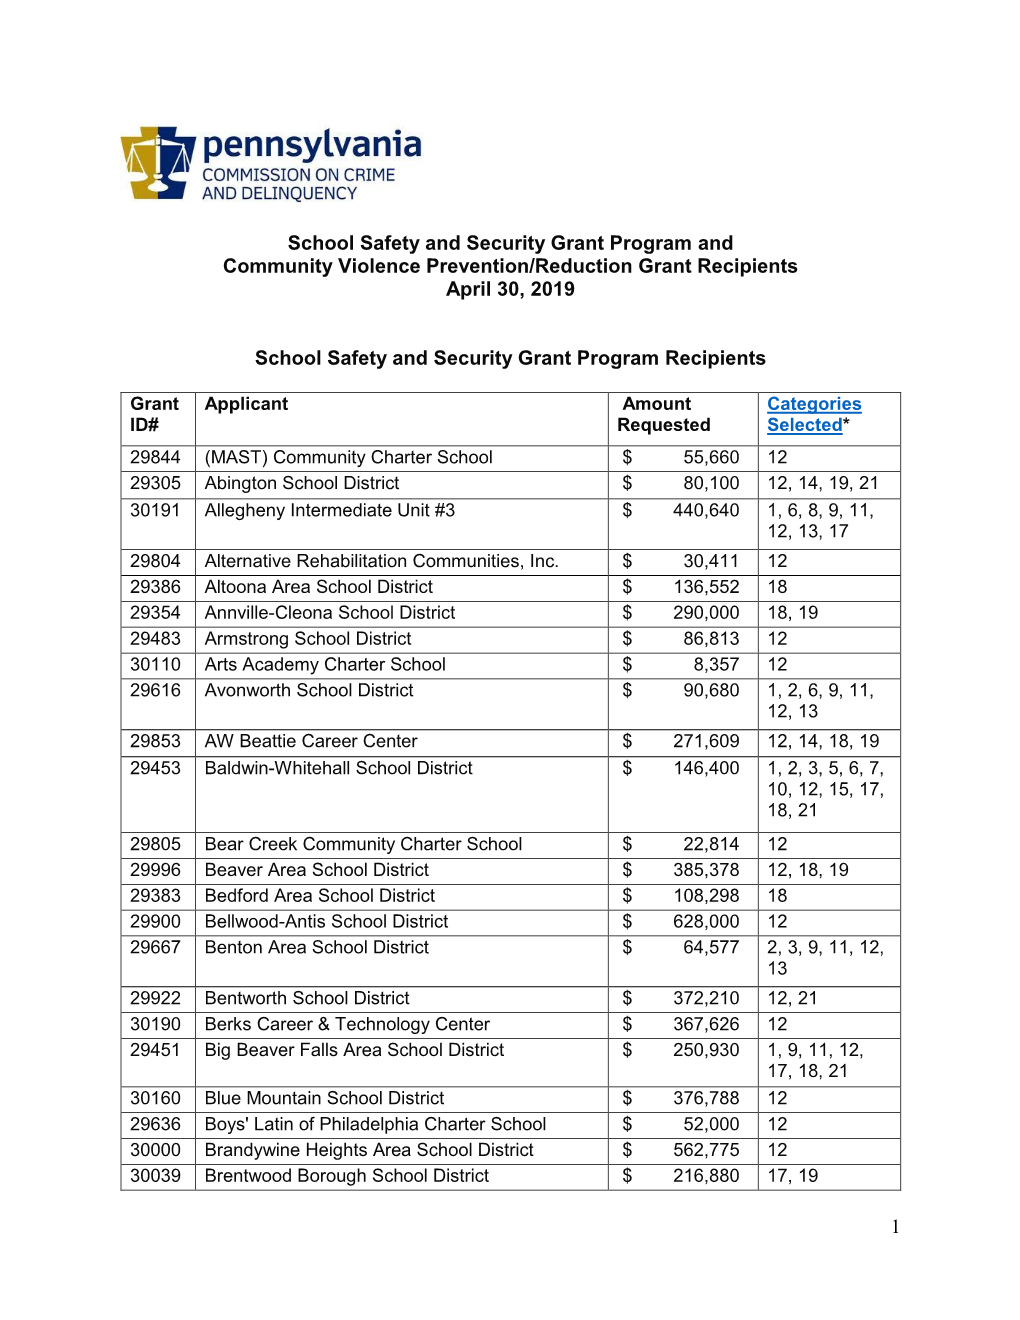 1 School Safety and Security Grant Program and Community Violence